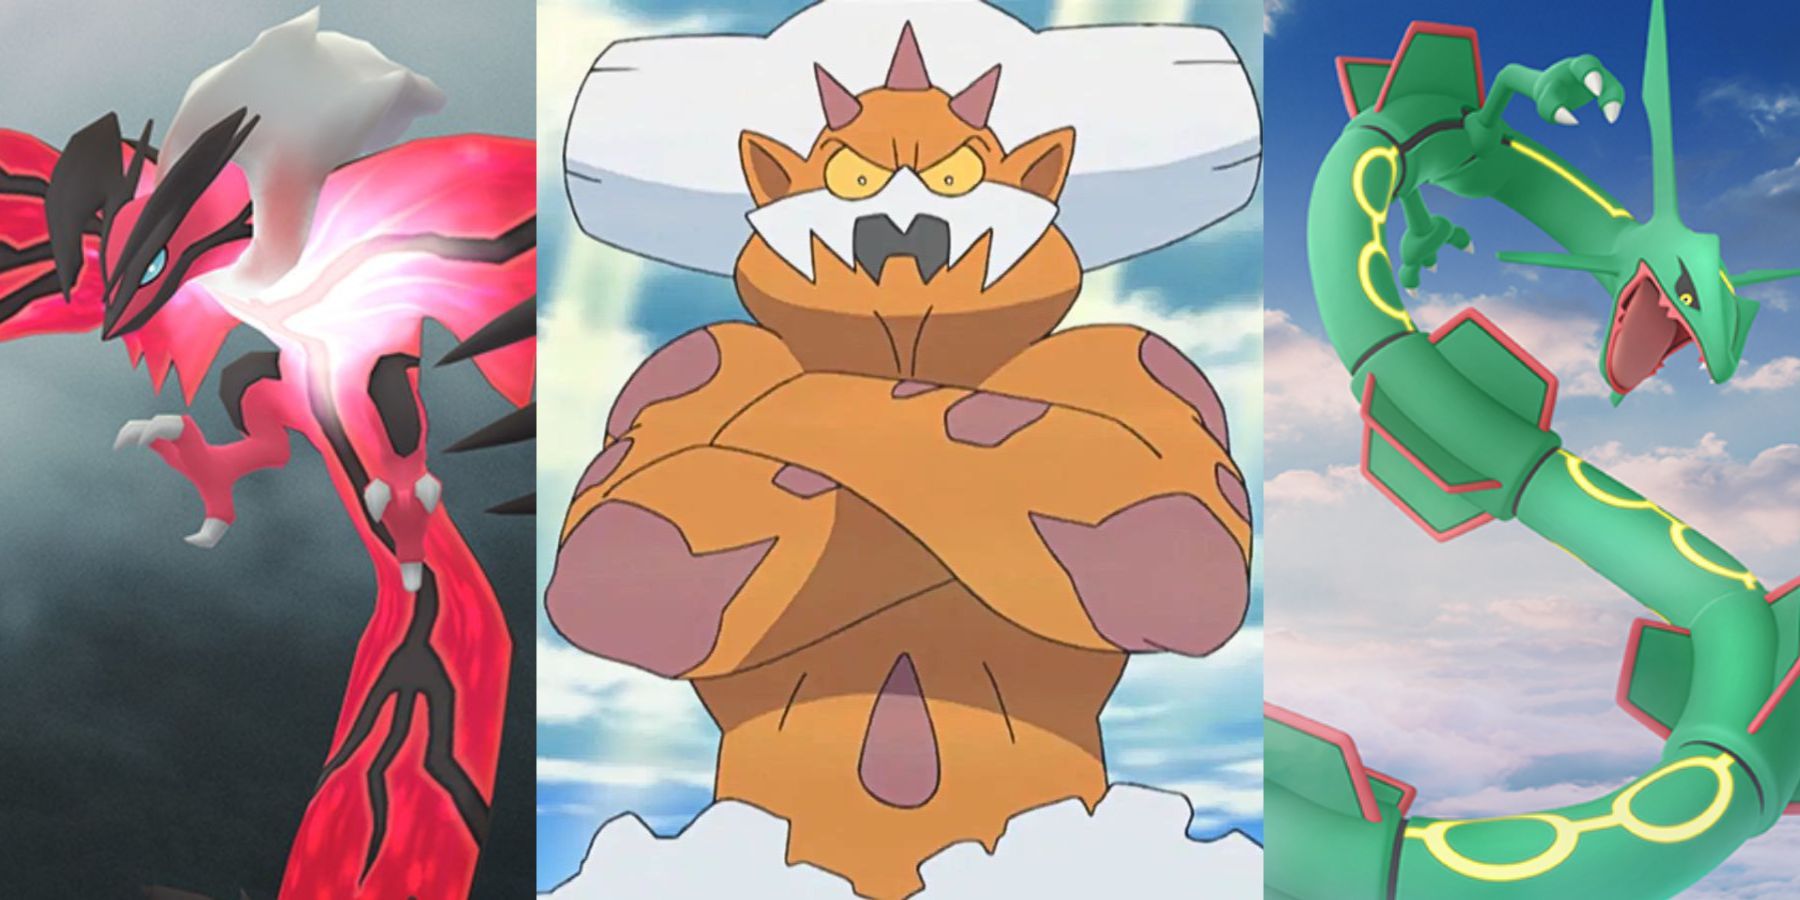 Yveltal, Landorus, and Rayquaza stand in a line reading themselves for battle